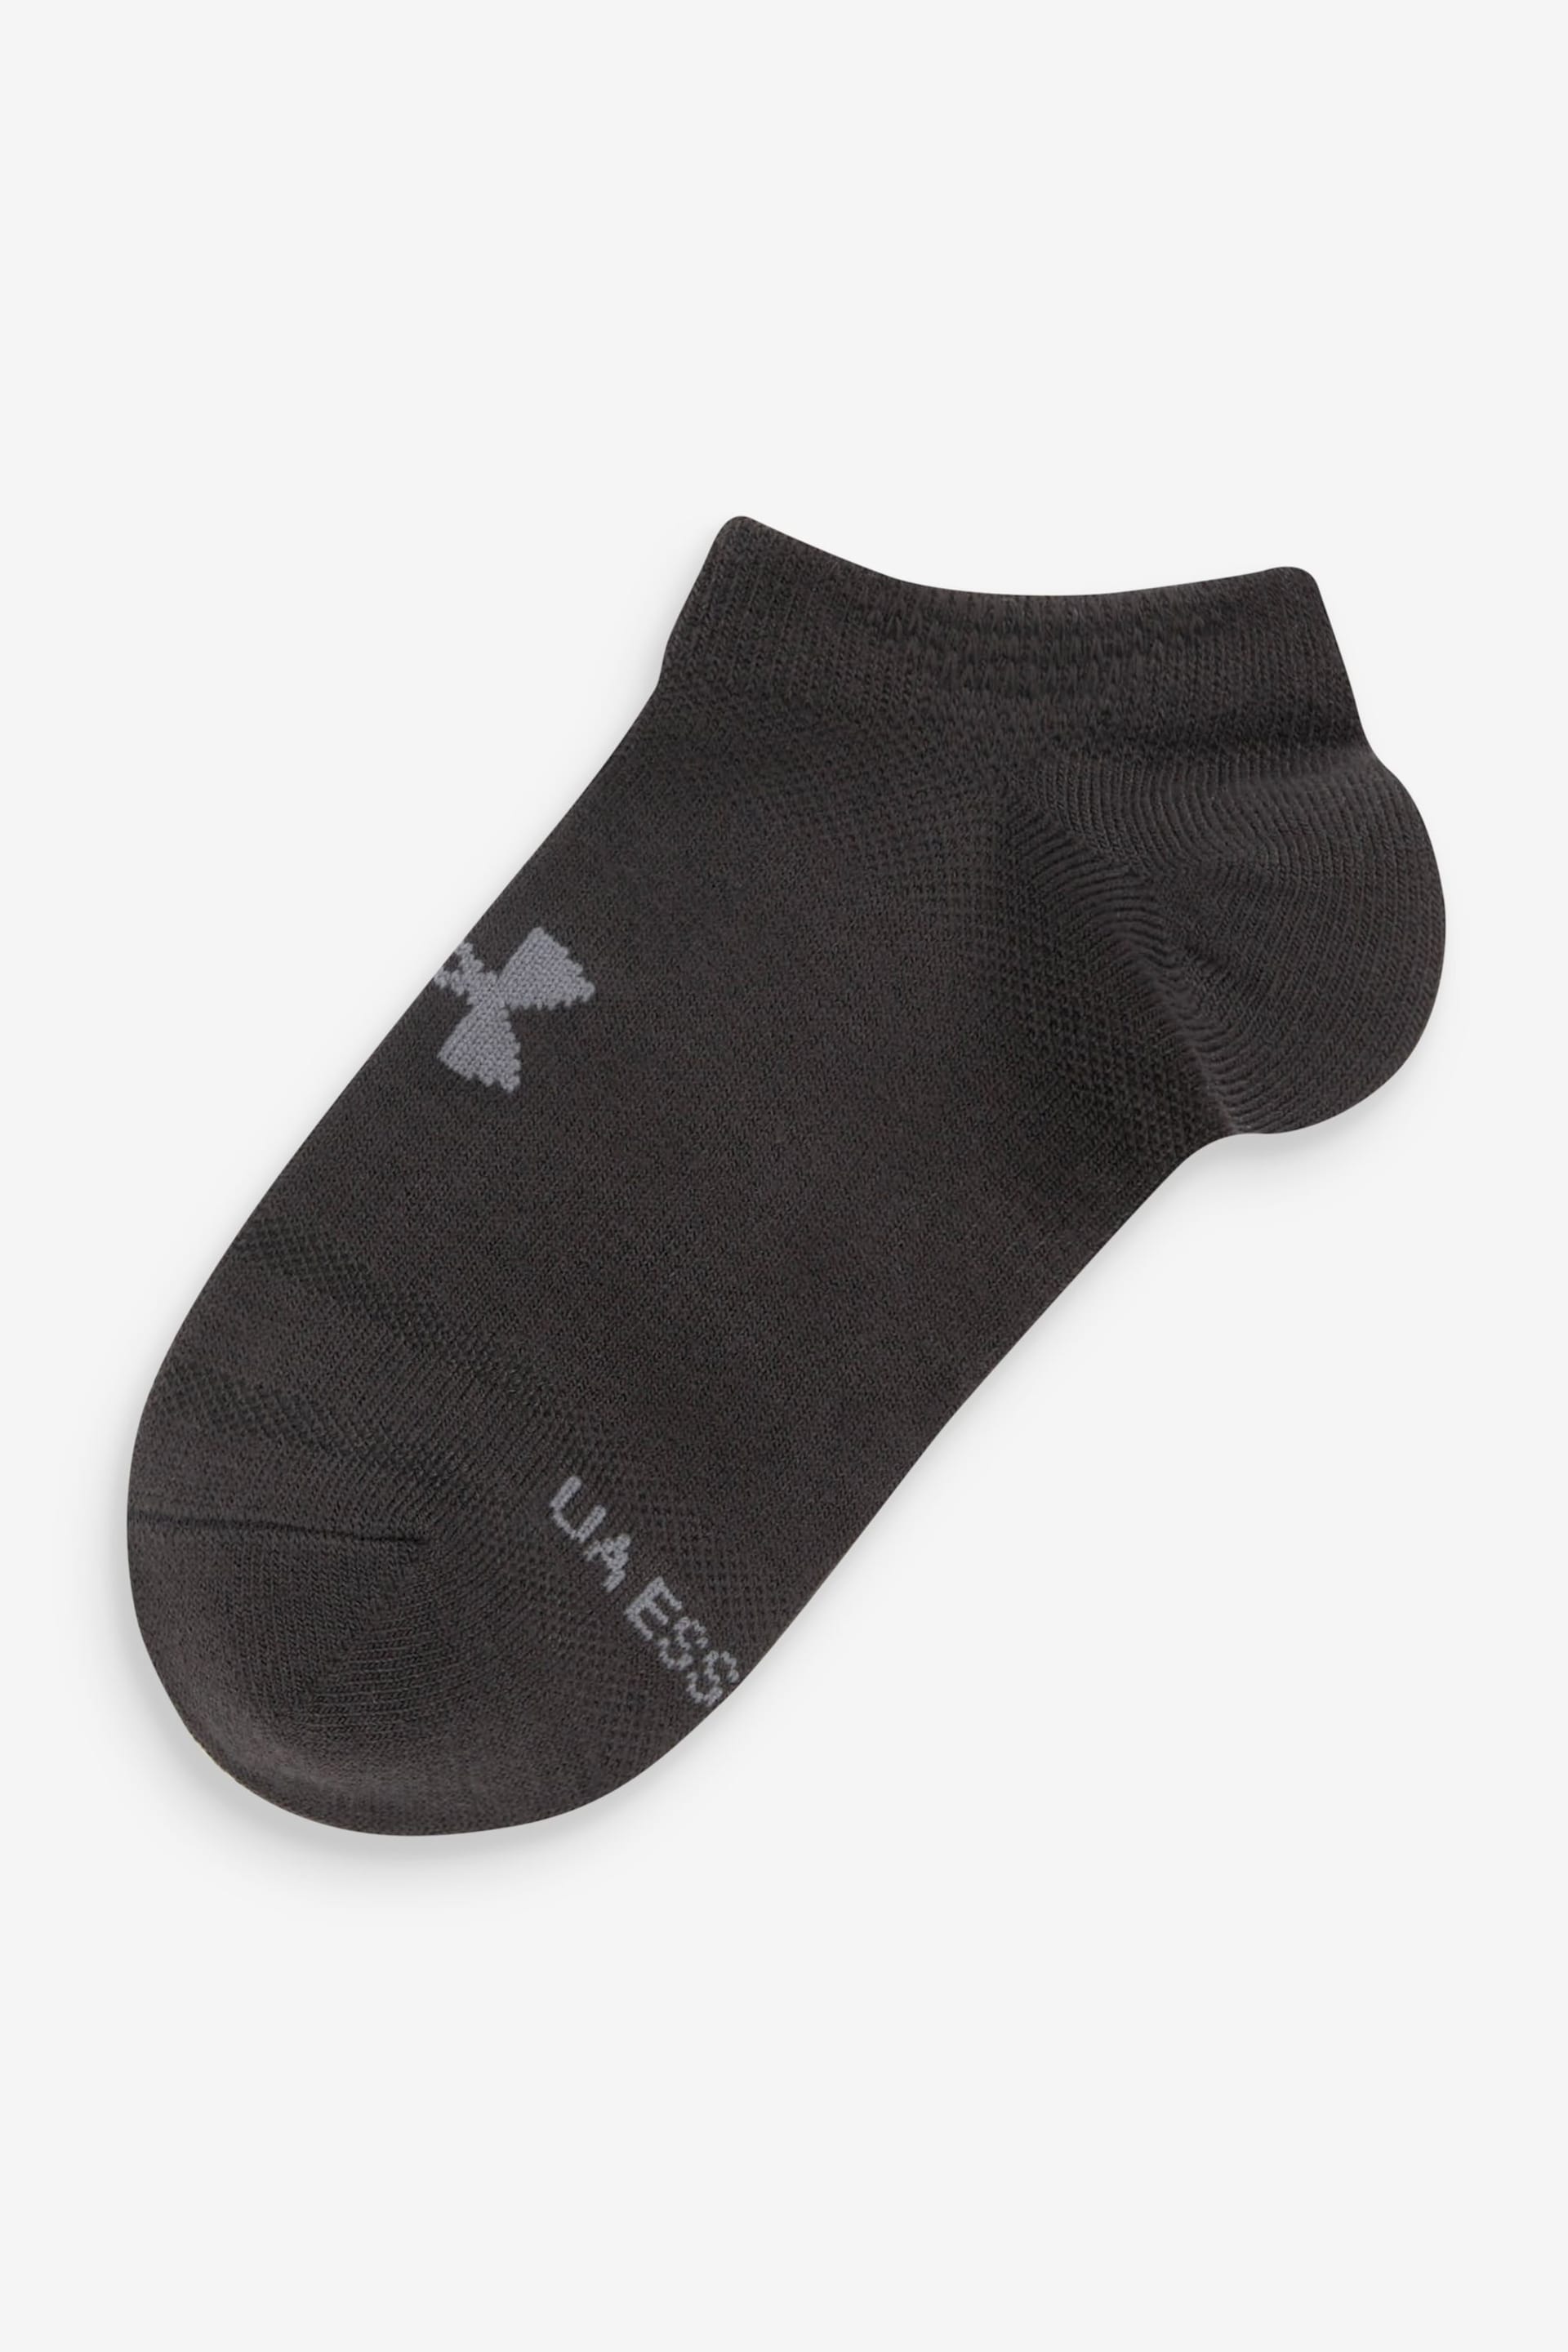 Under Armour Essential No Show Black Socks 6 Pack - Image 2 of 7